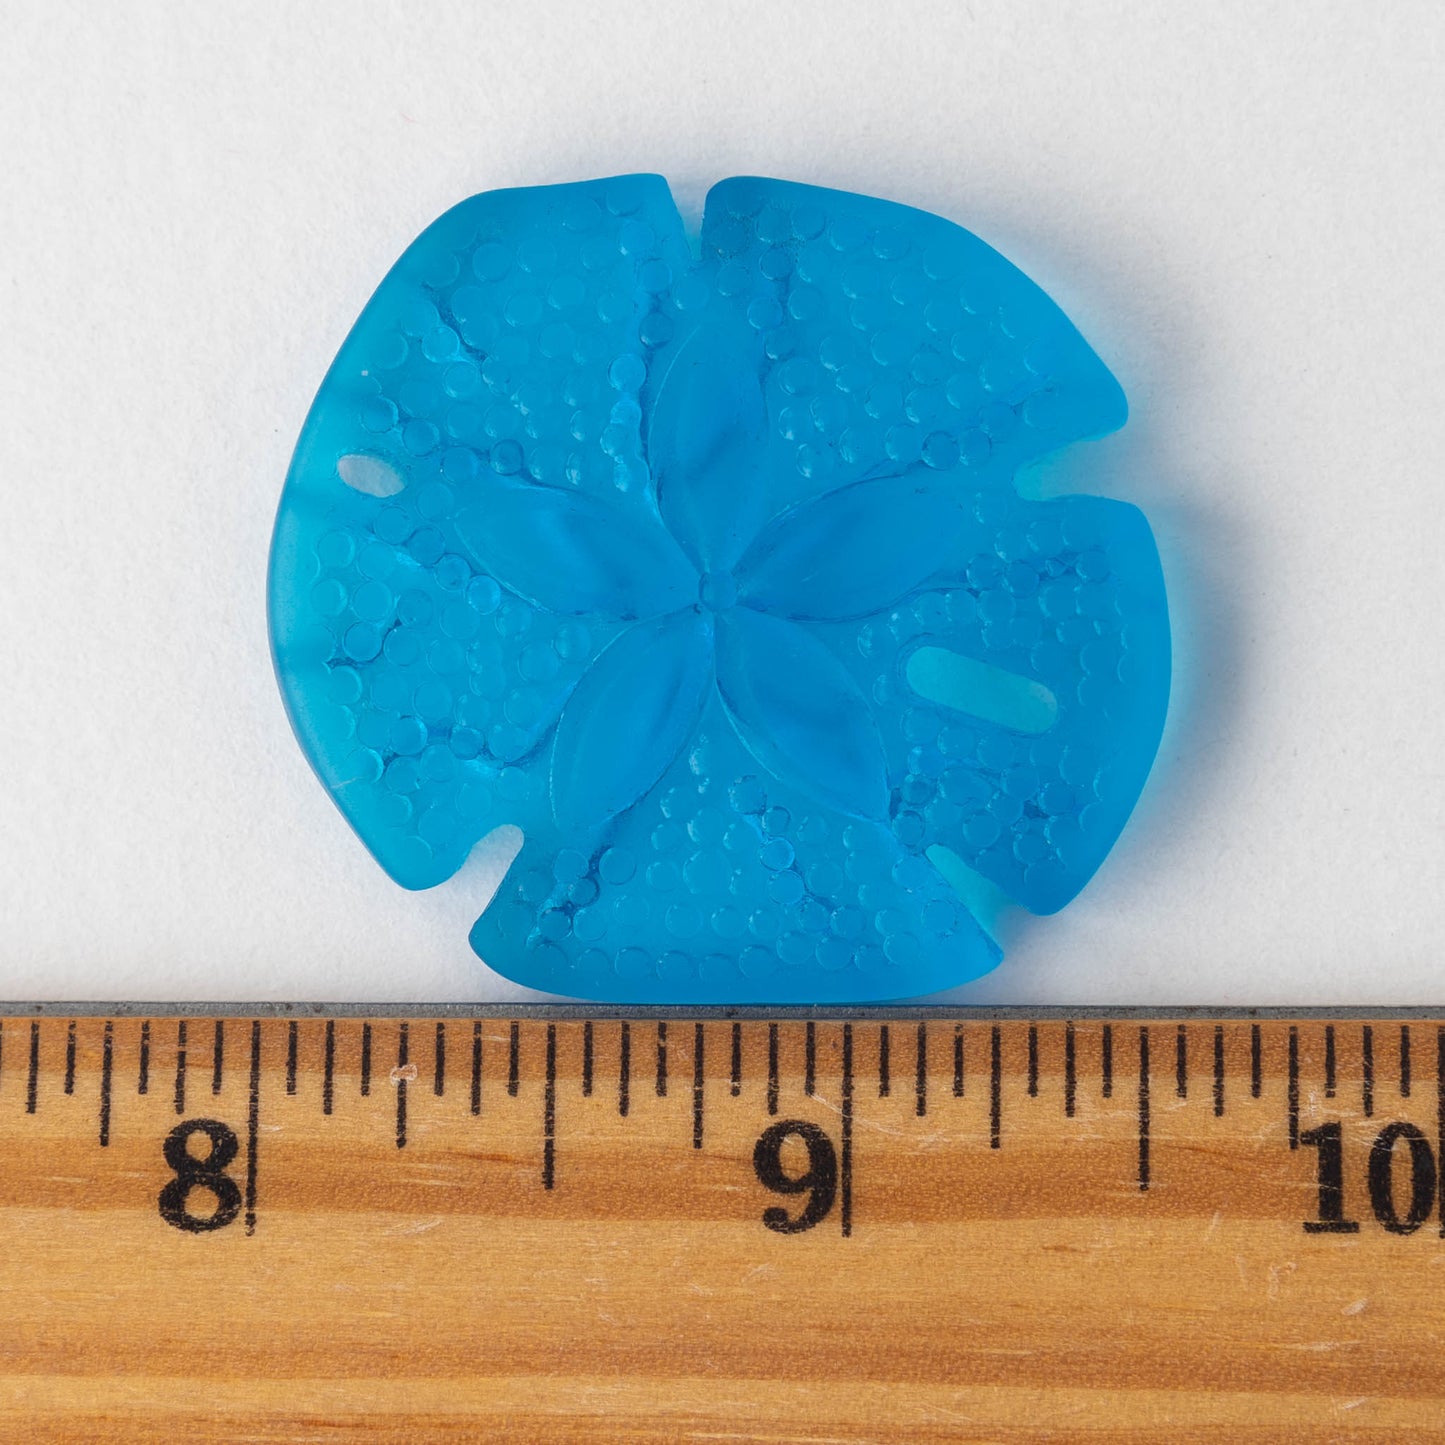 40x36mm Frosted Sand Dollar Pendants - Aqua  - 2 Pieces